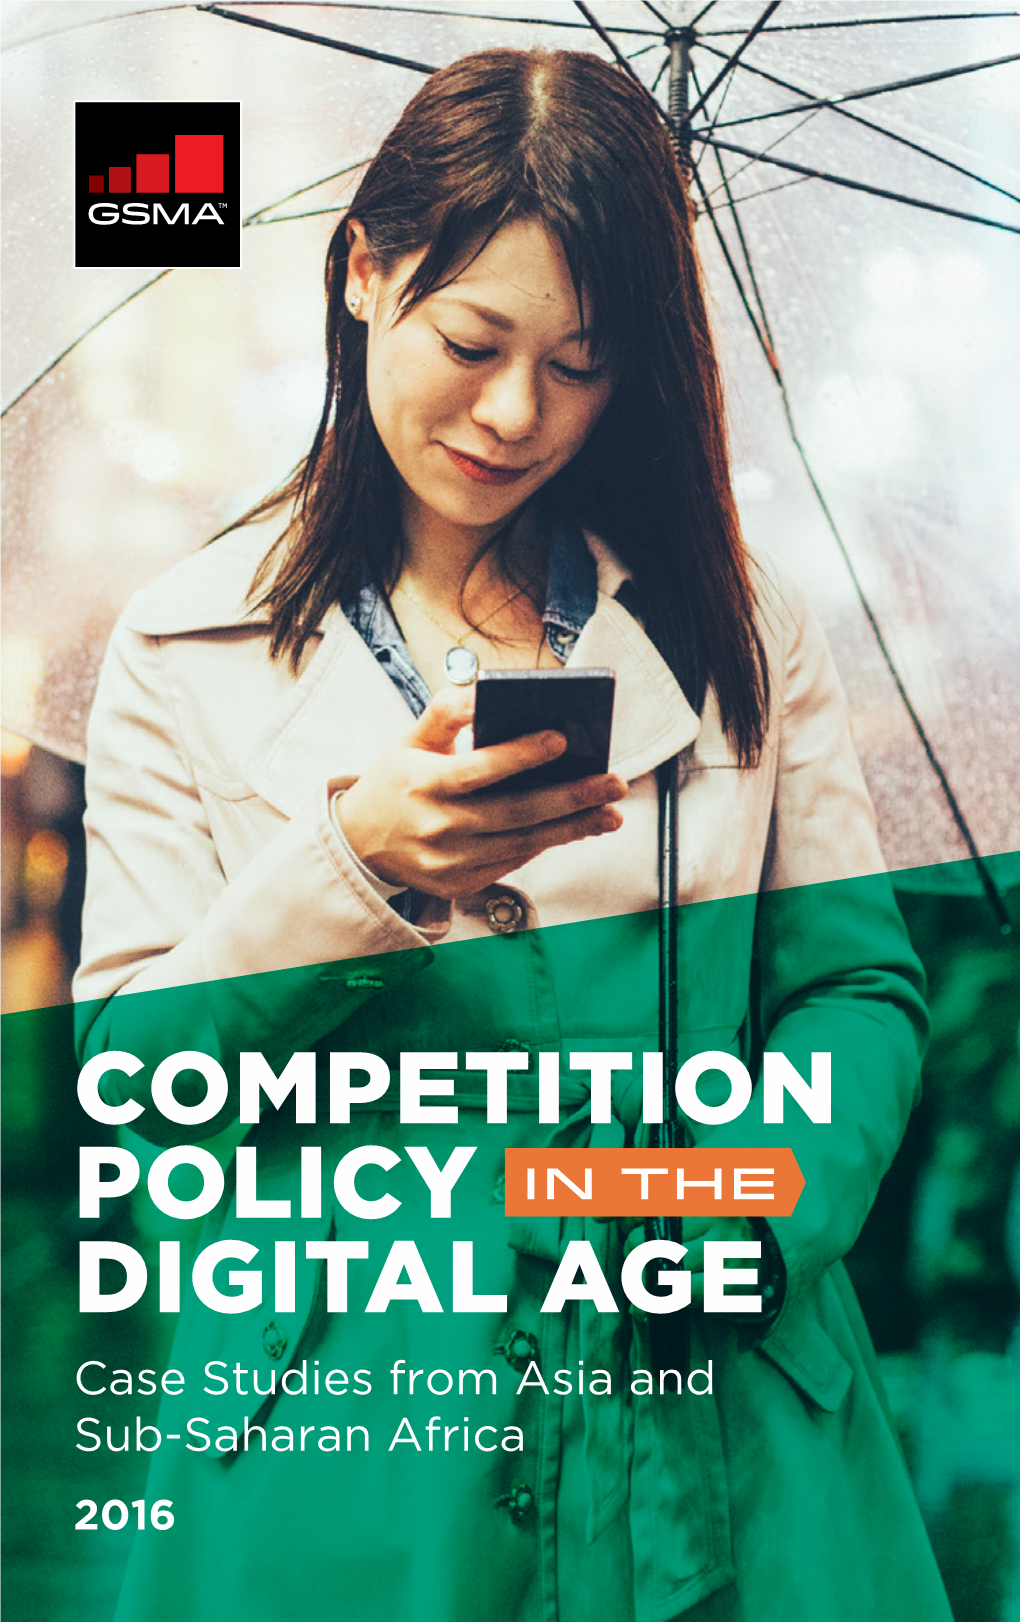 Competition Policy Digital Financial Inclusion and Digital Identity on the Development Agenda